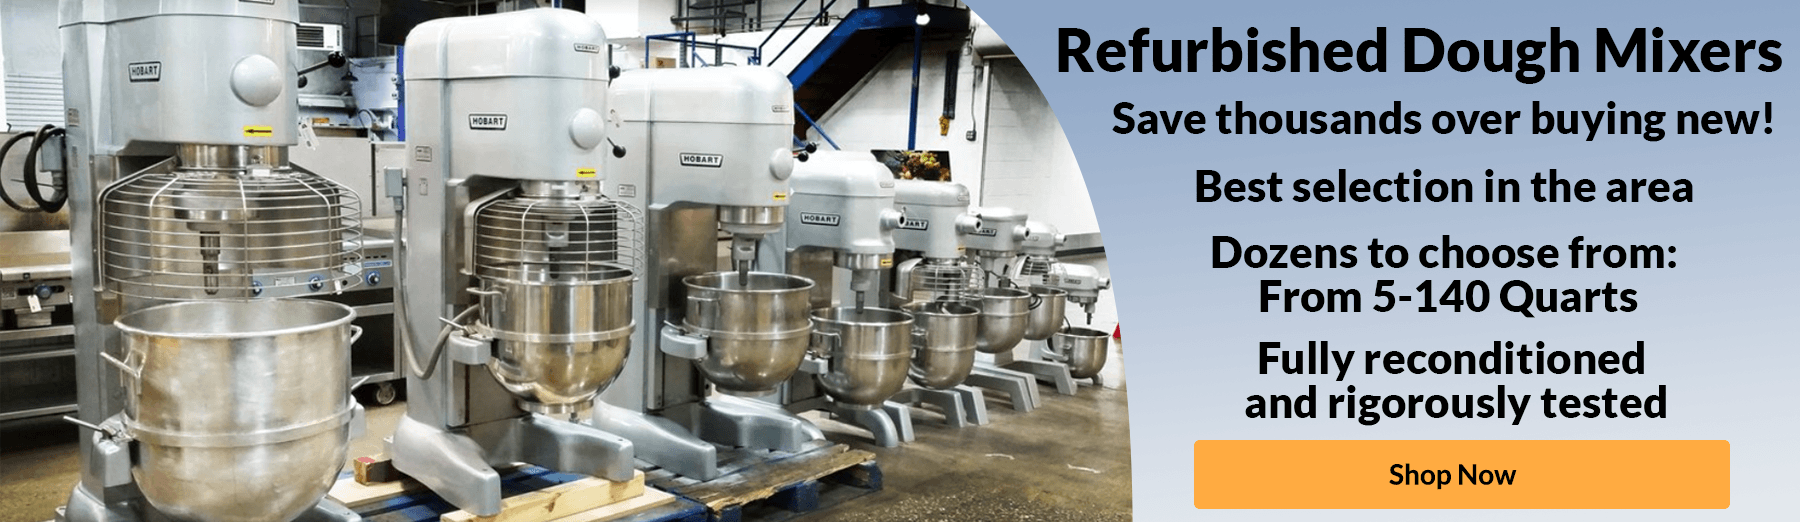 City Food Equipment is a leading seller of refurbished commercial dough mixers.  Hobart, Univex, Berkel/Blakeslee, and other brands.  Save thousands over buying new! Dozens to choose from: 5-140 Quarts.  Fully reconditioned and rigorously tested.